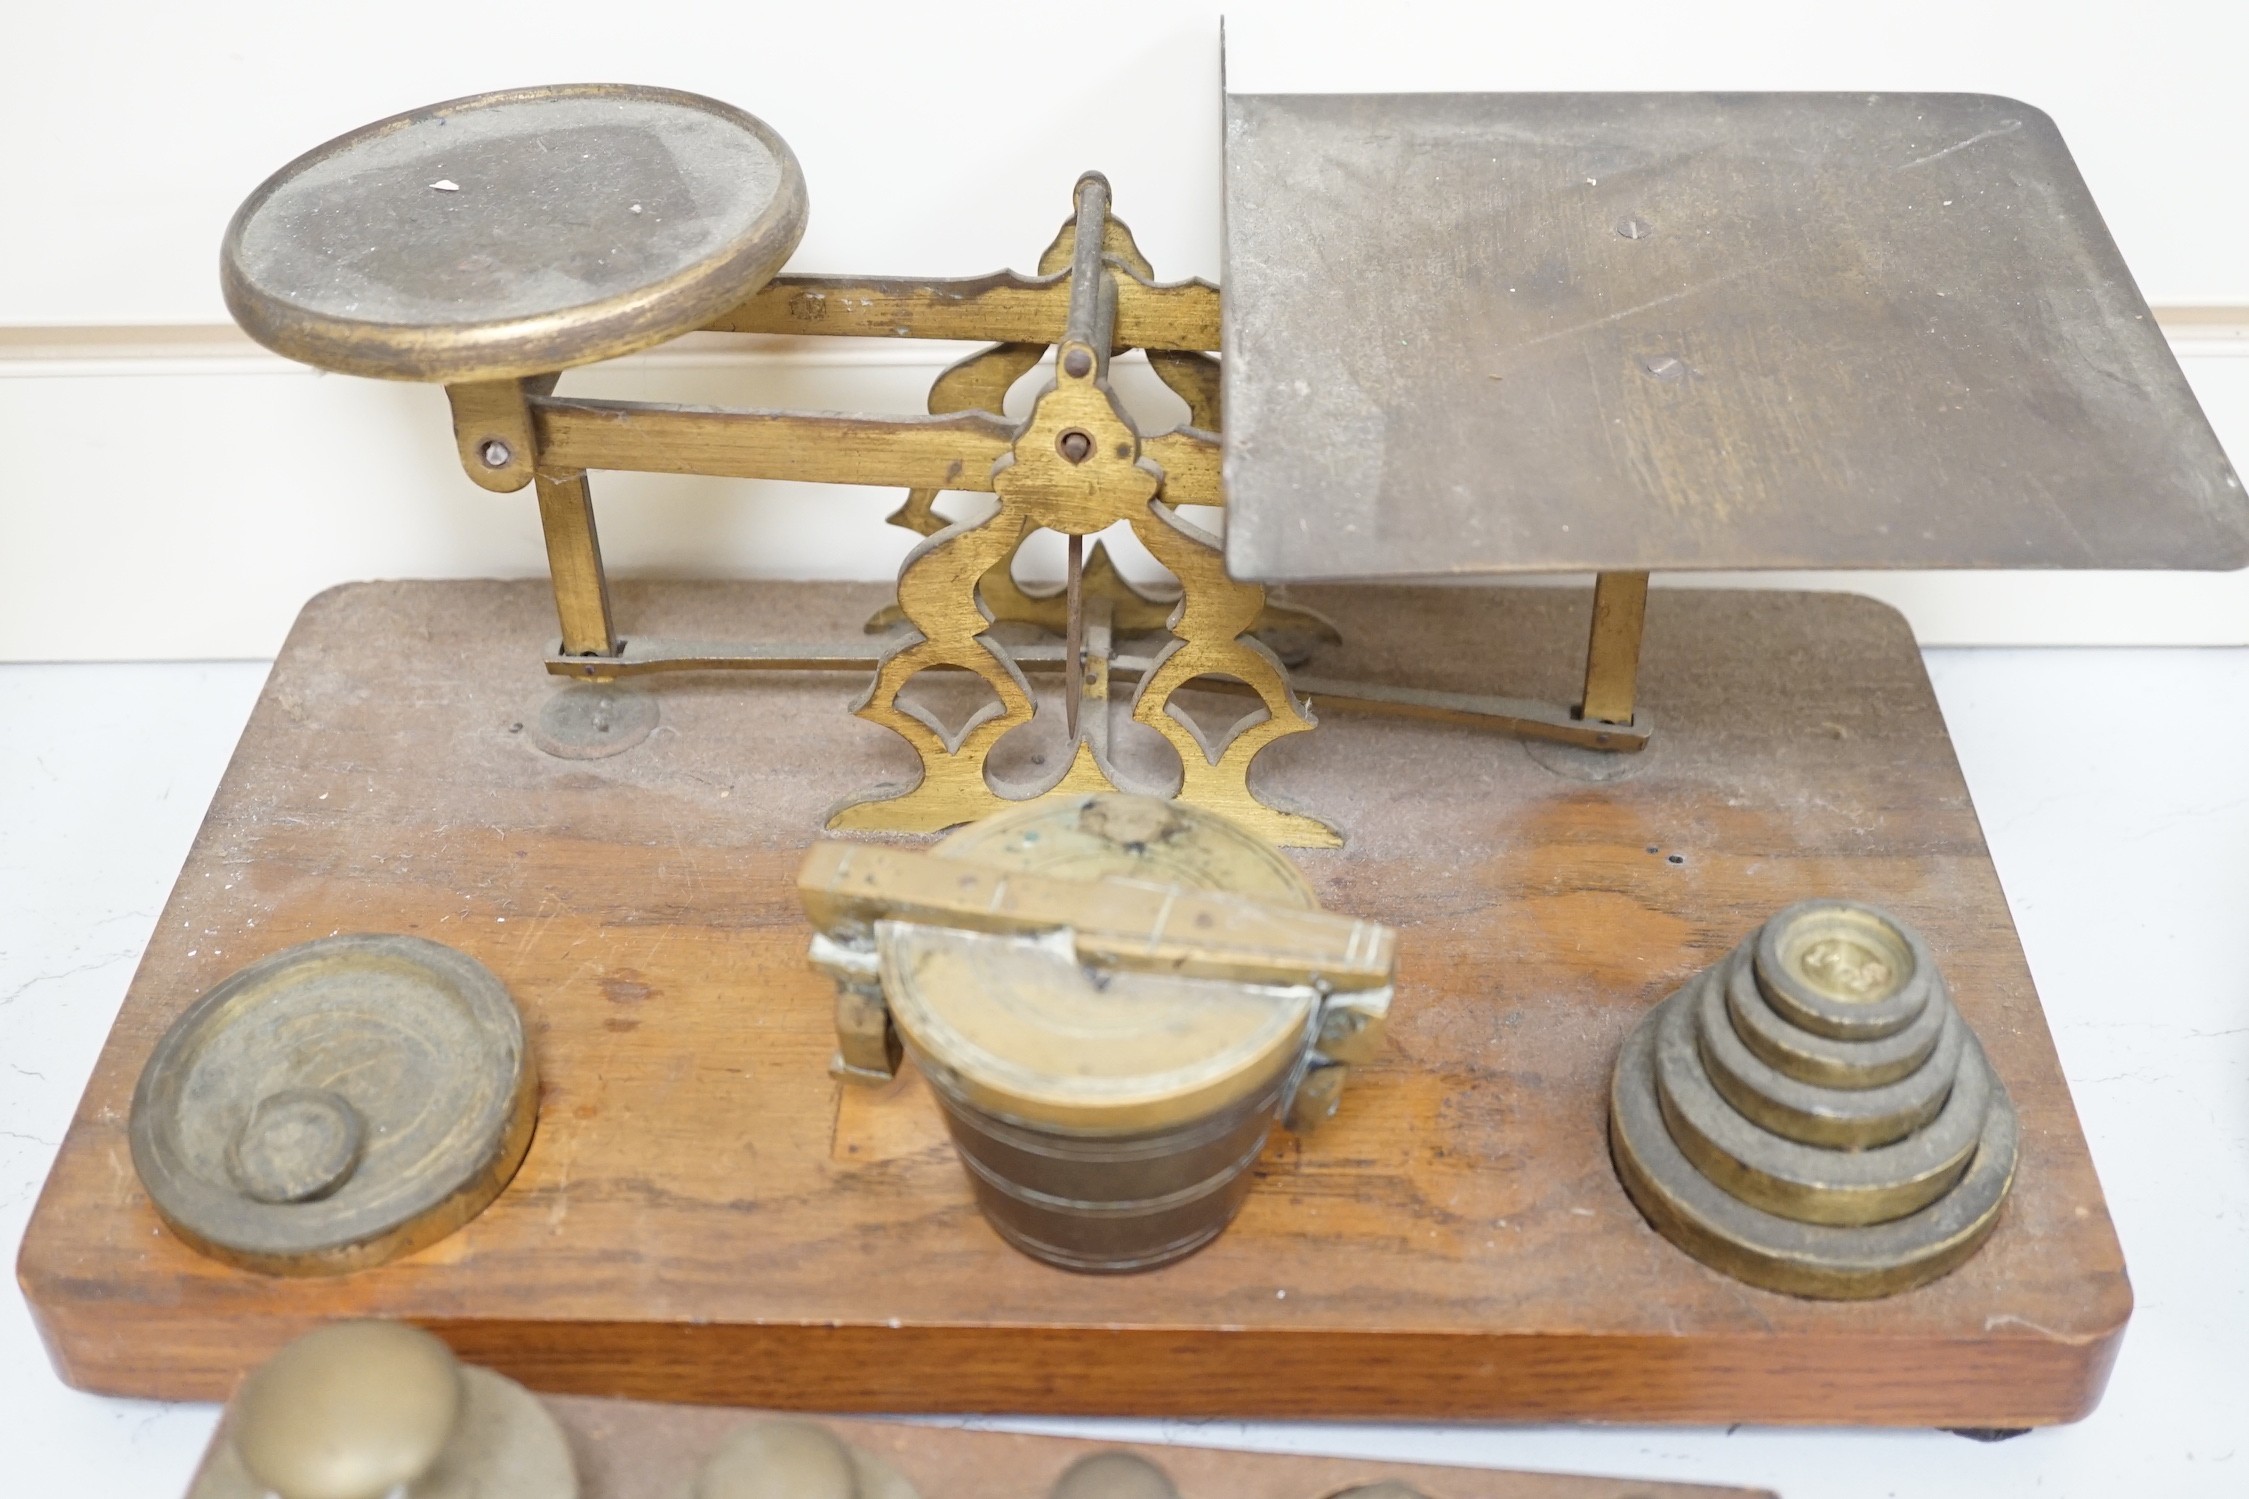 A set of brass postal scales and weights, a separate set of weights and another, set in wooden stand